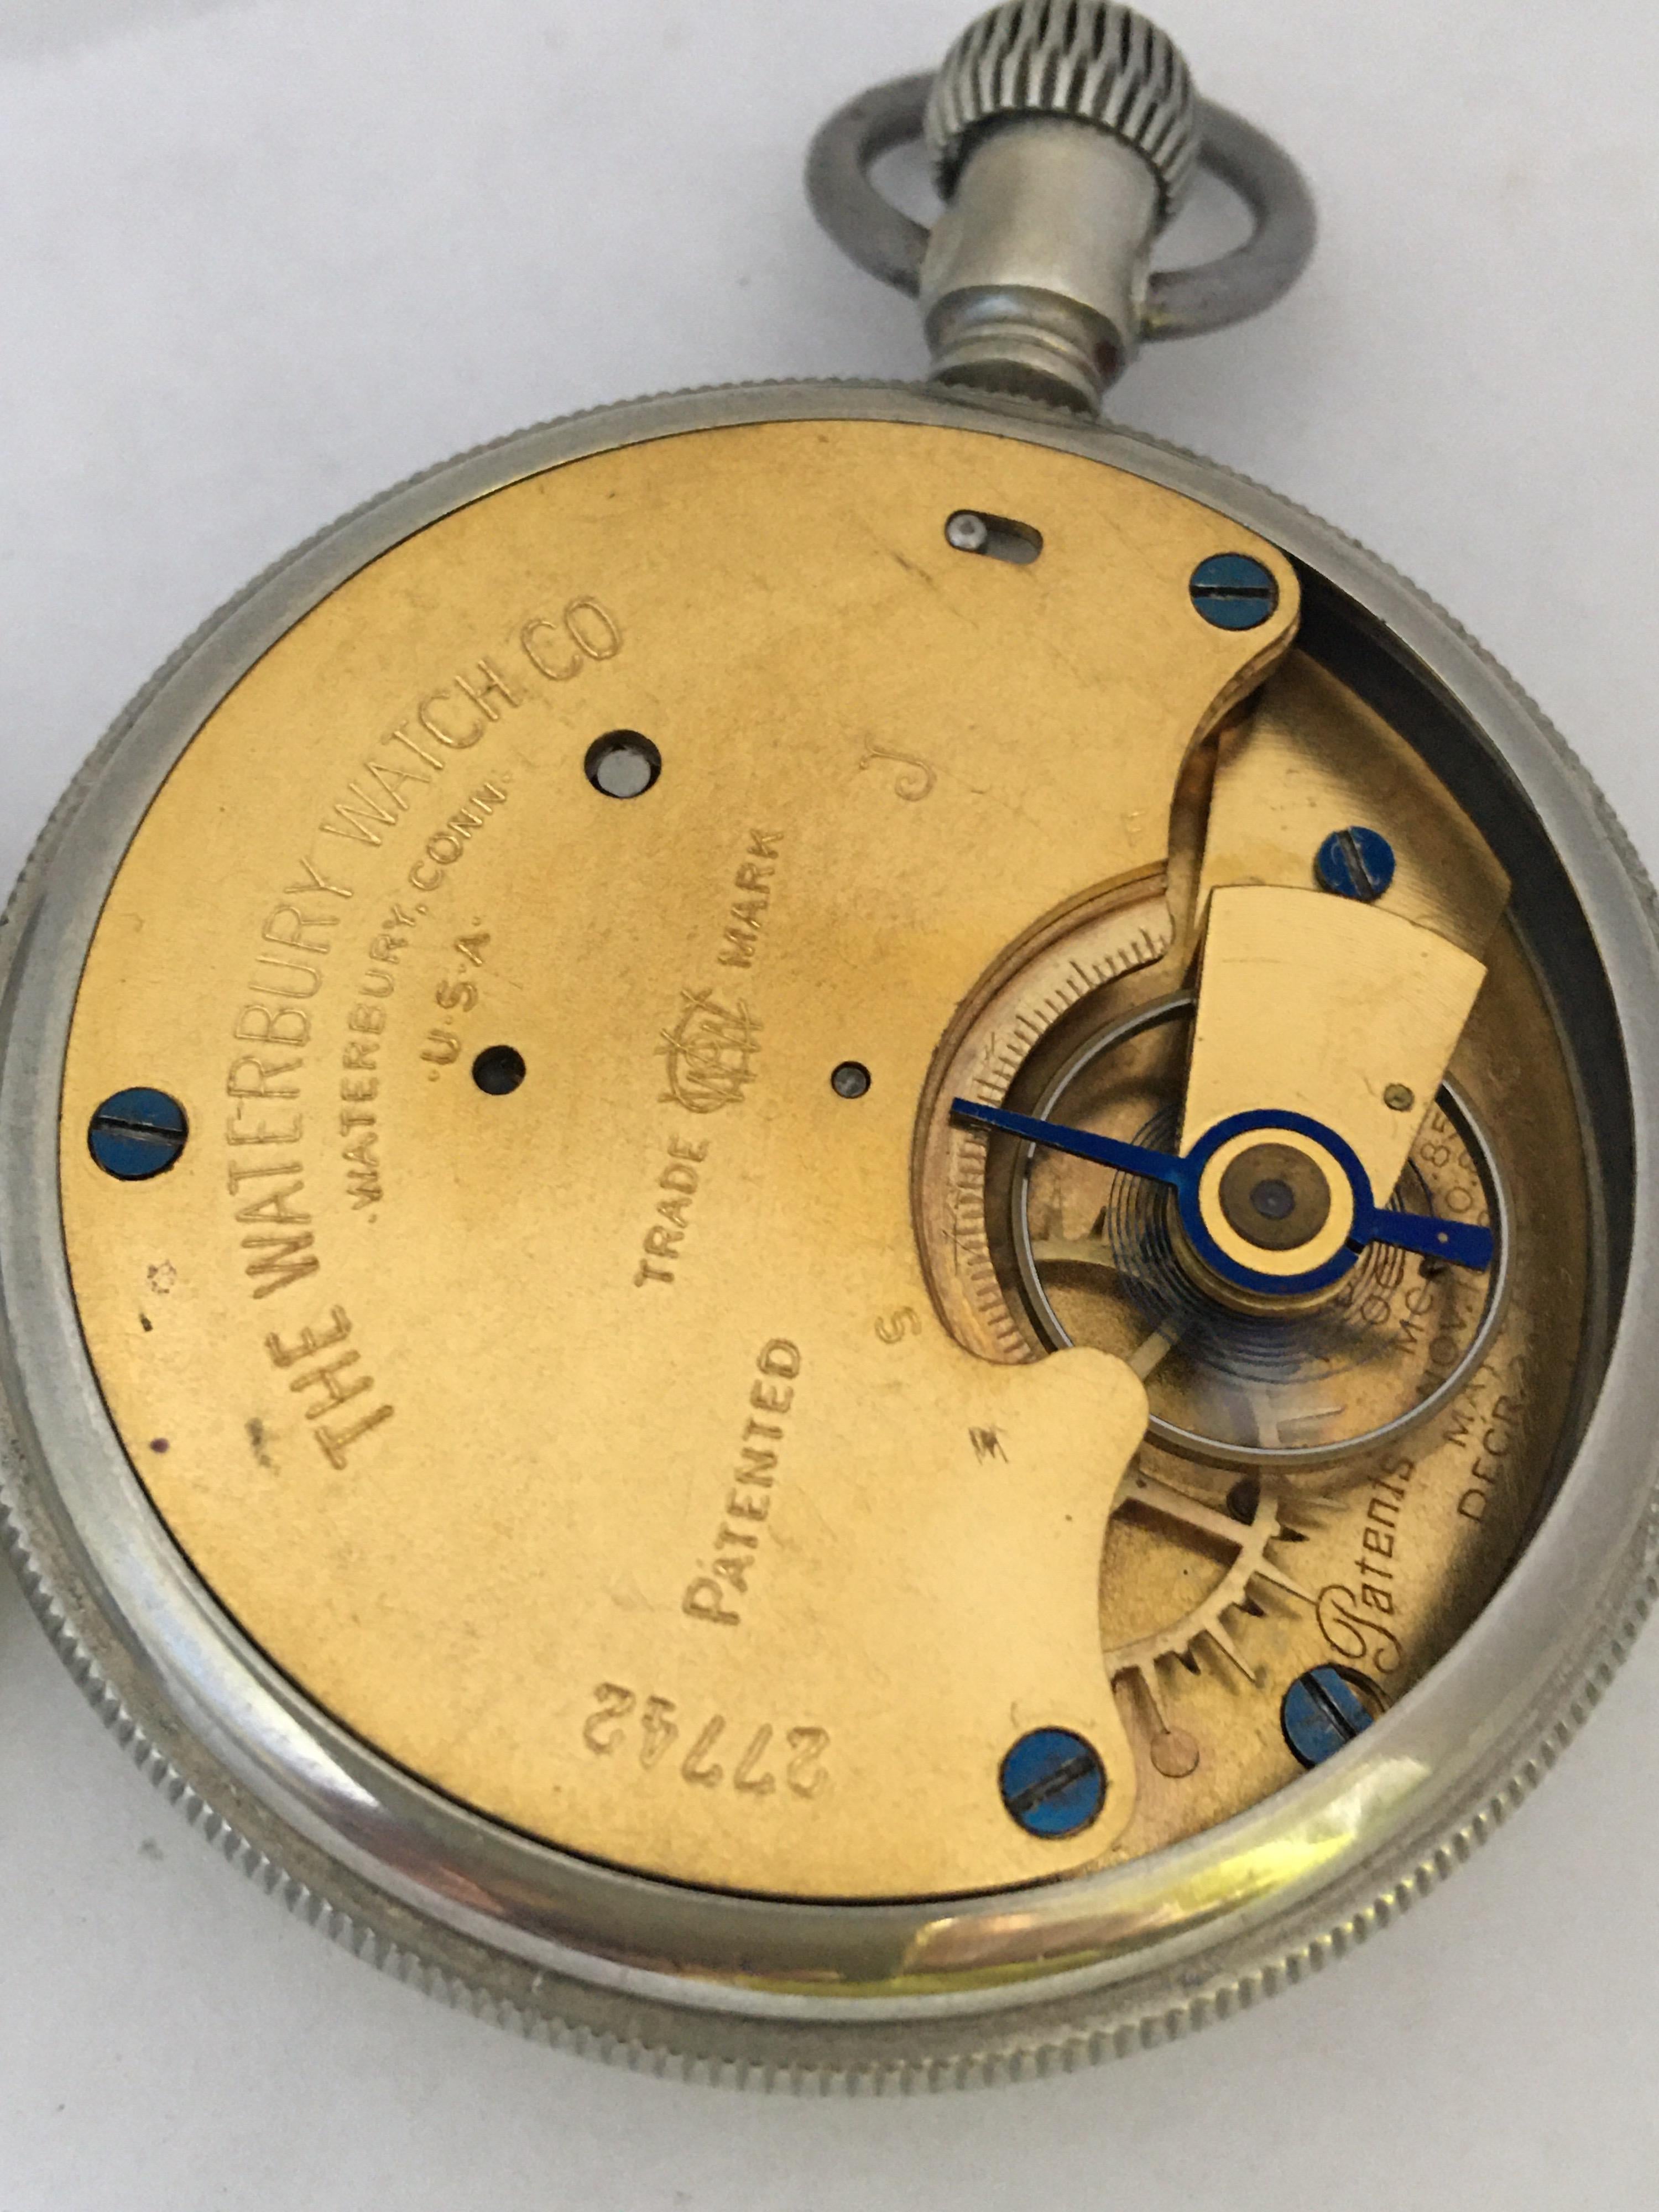 Antique Waterbury & Watch Co. Hand-Winding Pocket Watch In Good Condition For Sale In Carlisle, GB